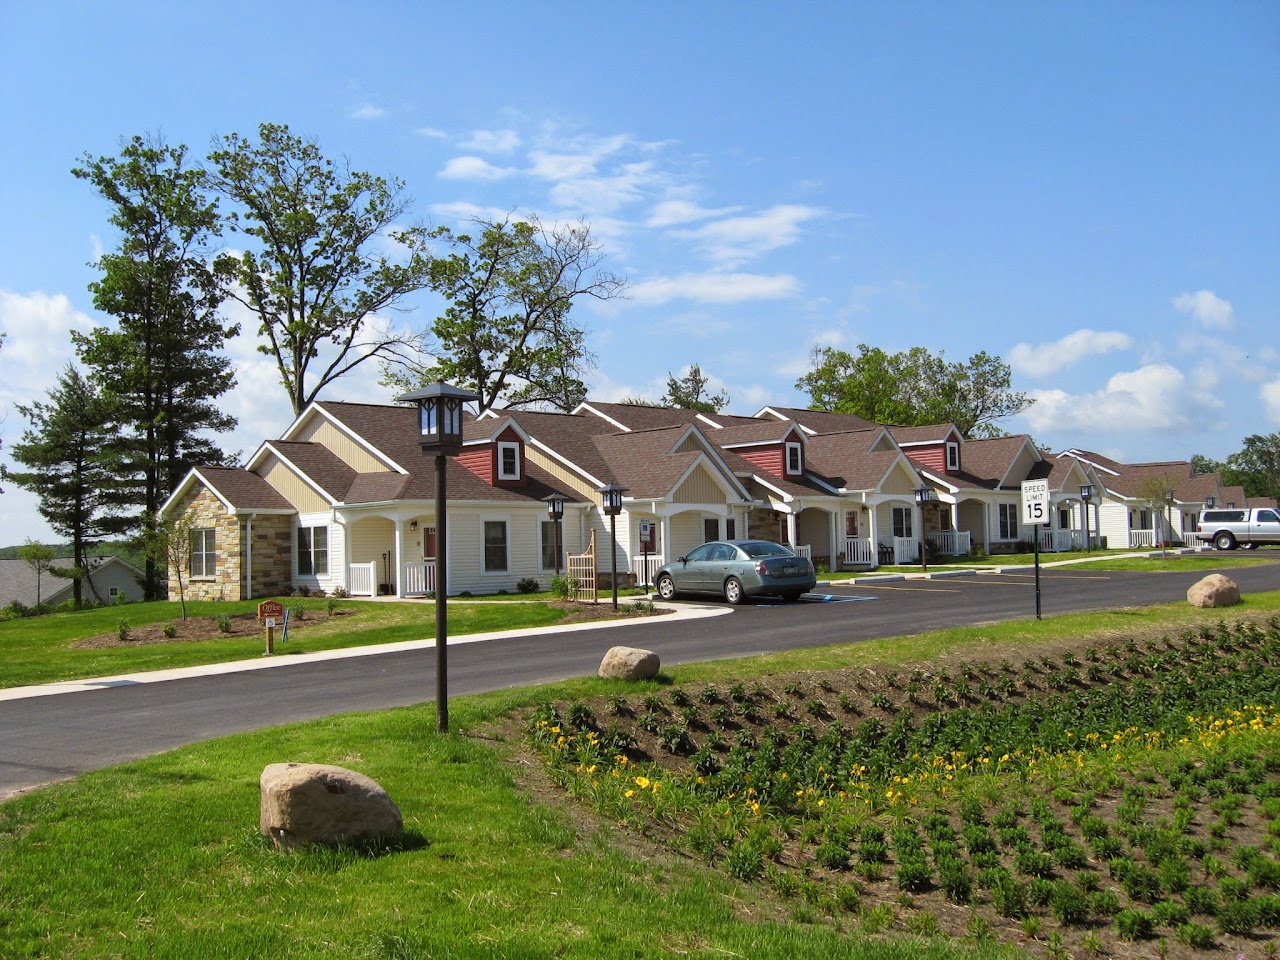 Photo of OAKS SENIOR COMMUNITY. Affordable housing located at 3698 GRACE AVE CRESCO, PA 18326